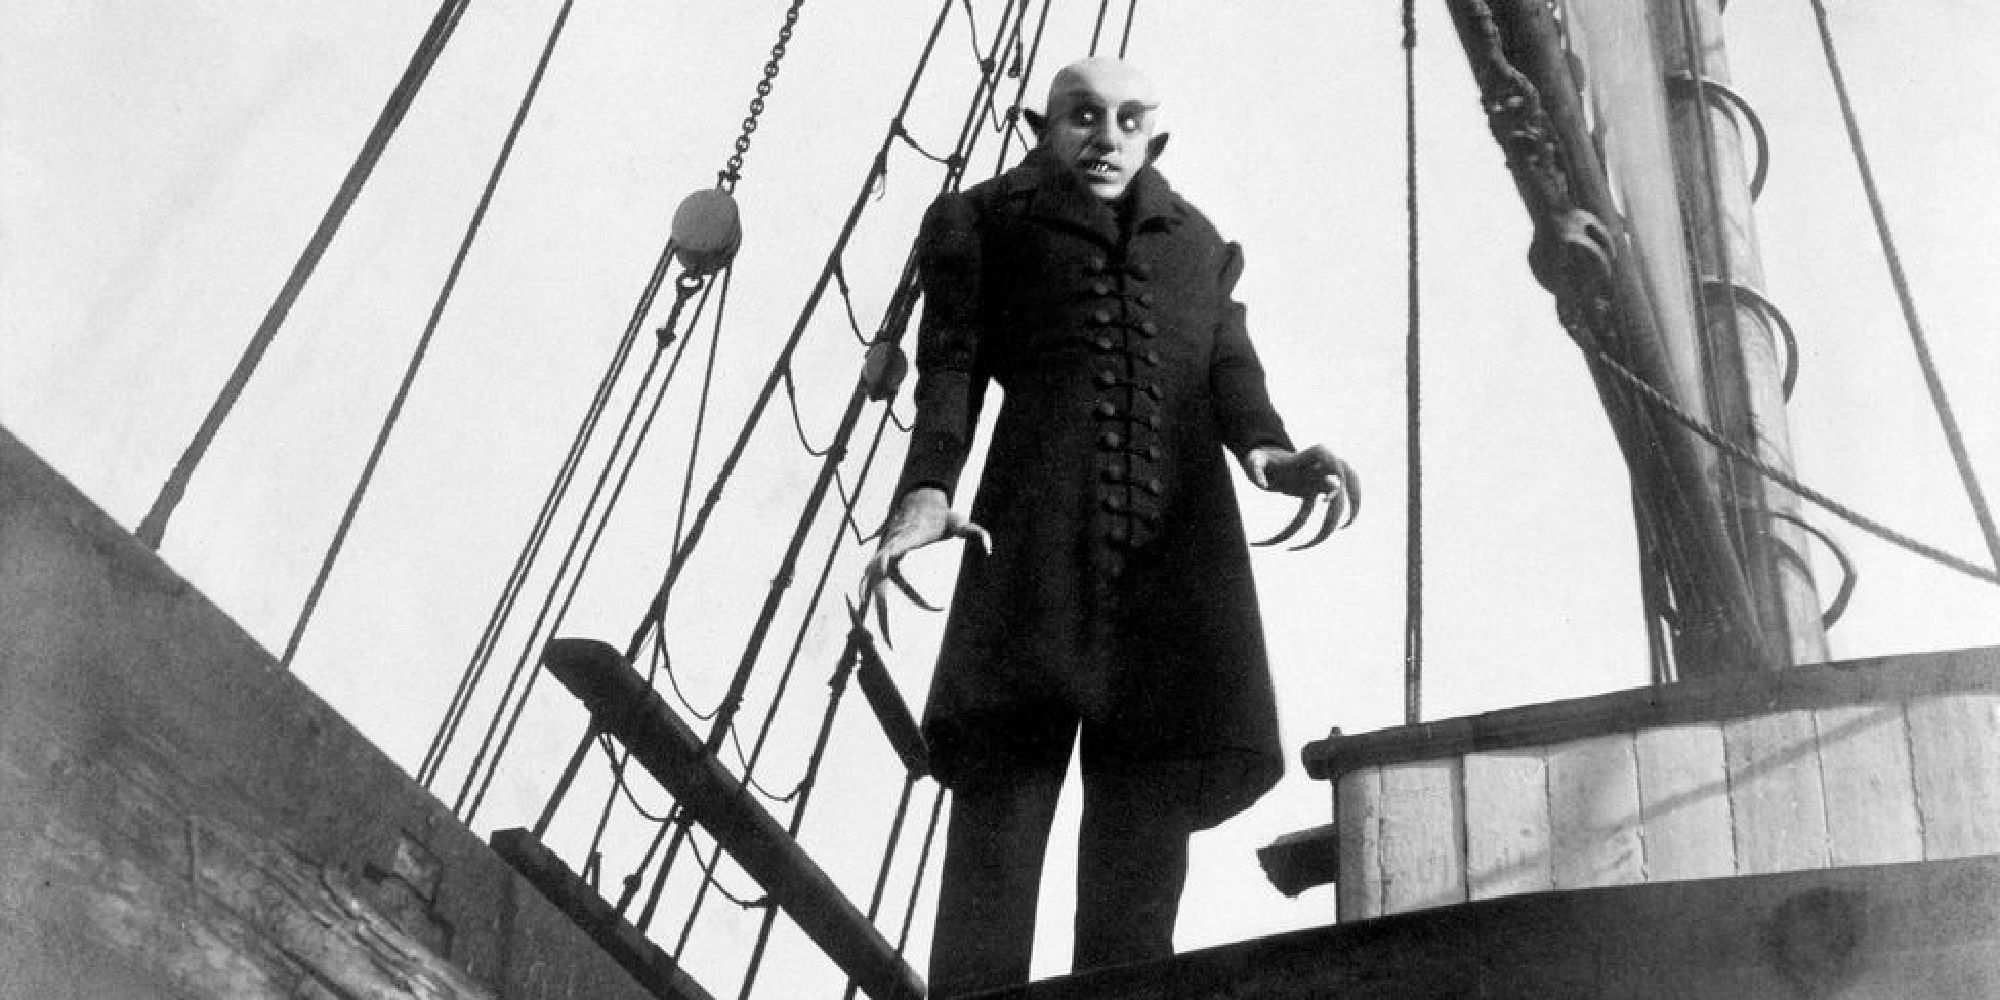 Count Orlak stands on a boat, his terrifying visage looking out over the deck. 